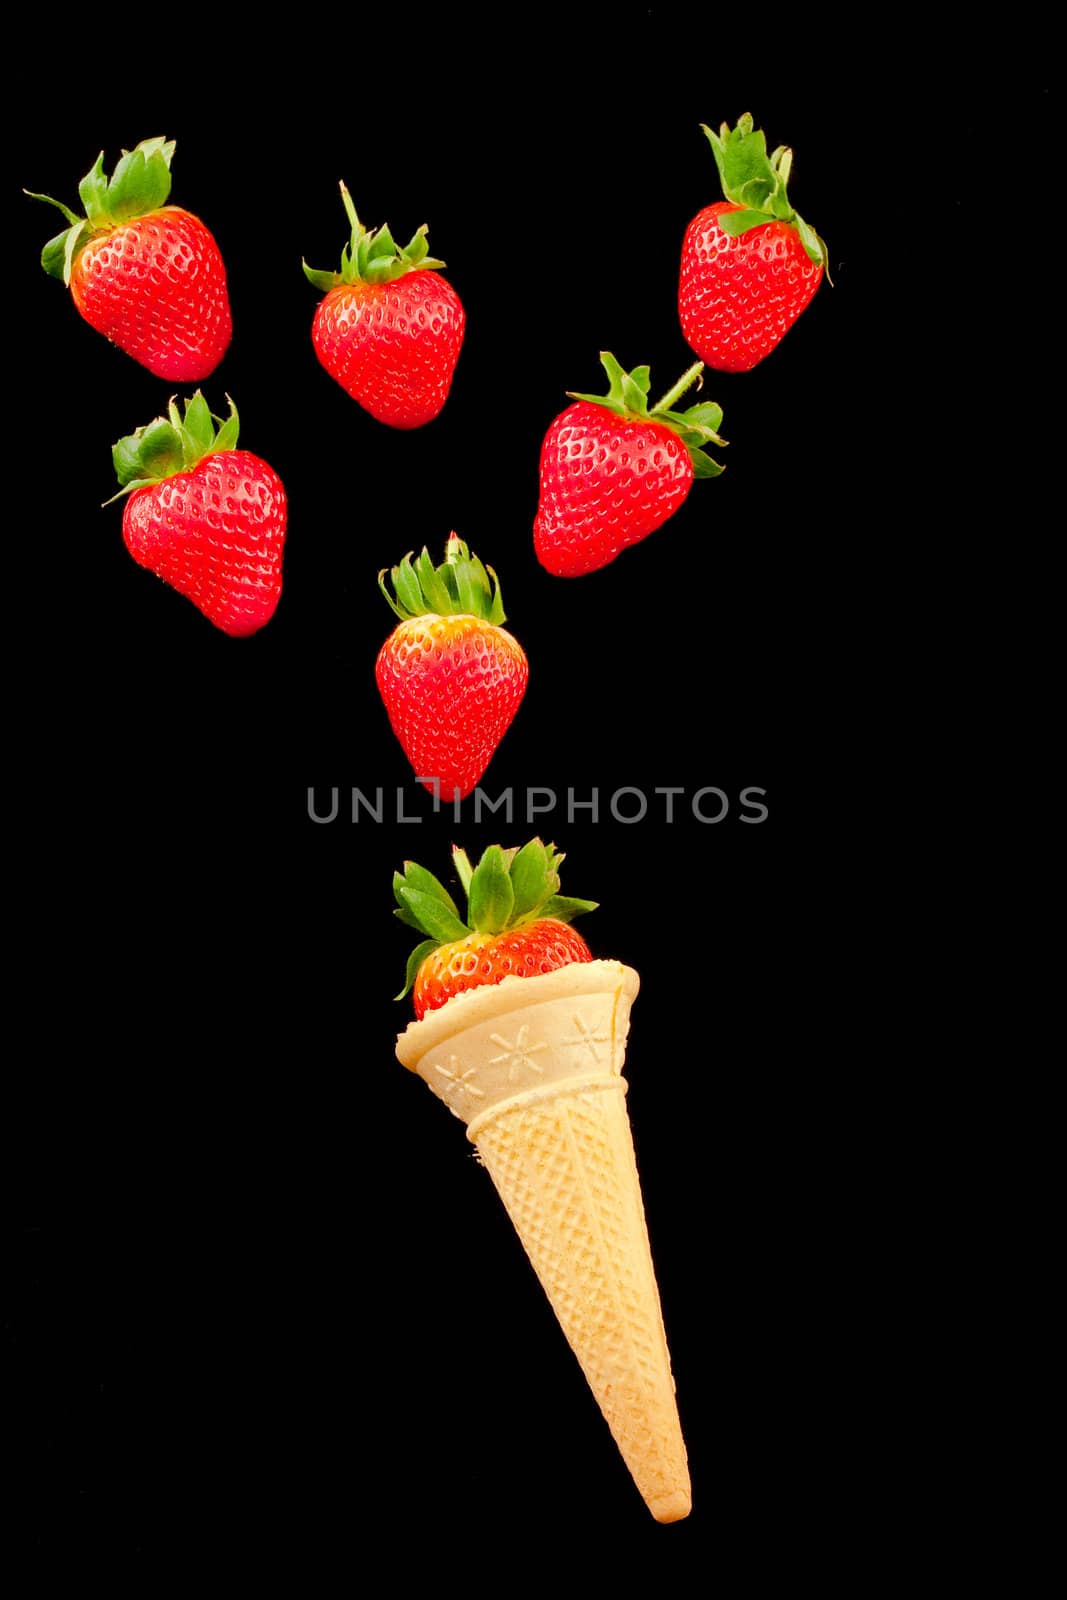 strawberries and a wafer cone